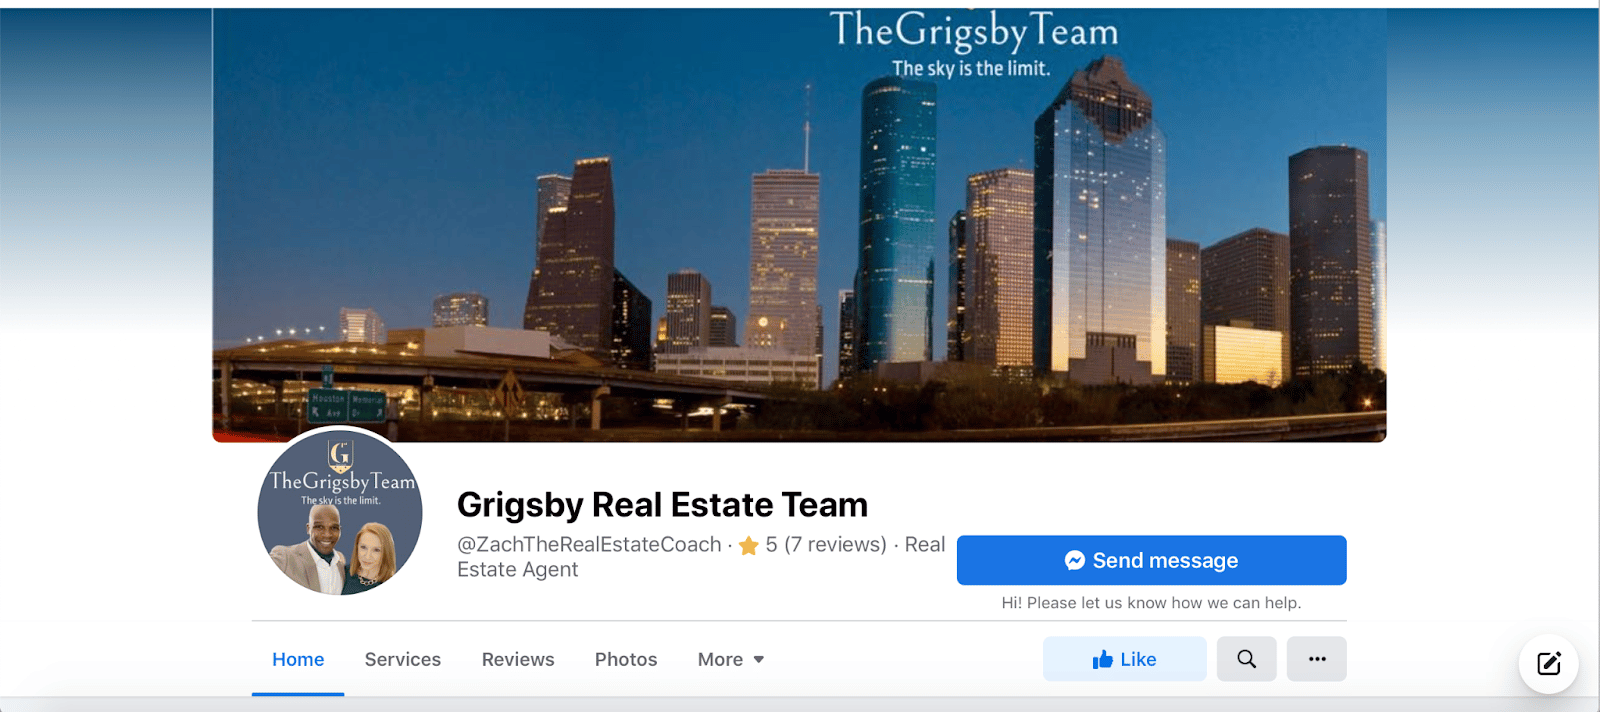 grigsby-real-estate-team-facebook-page